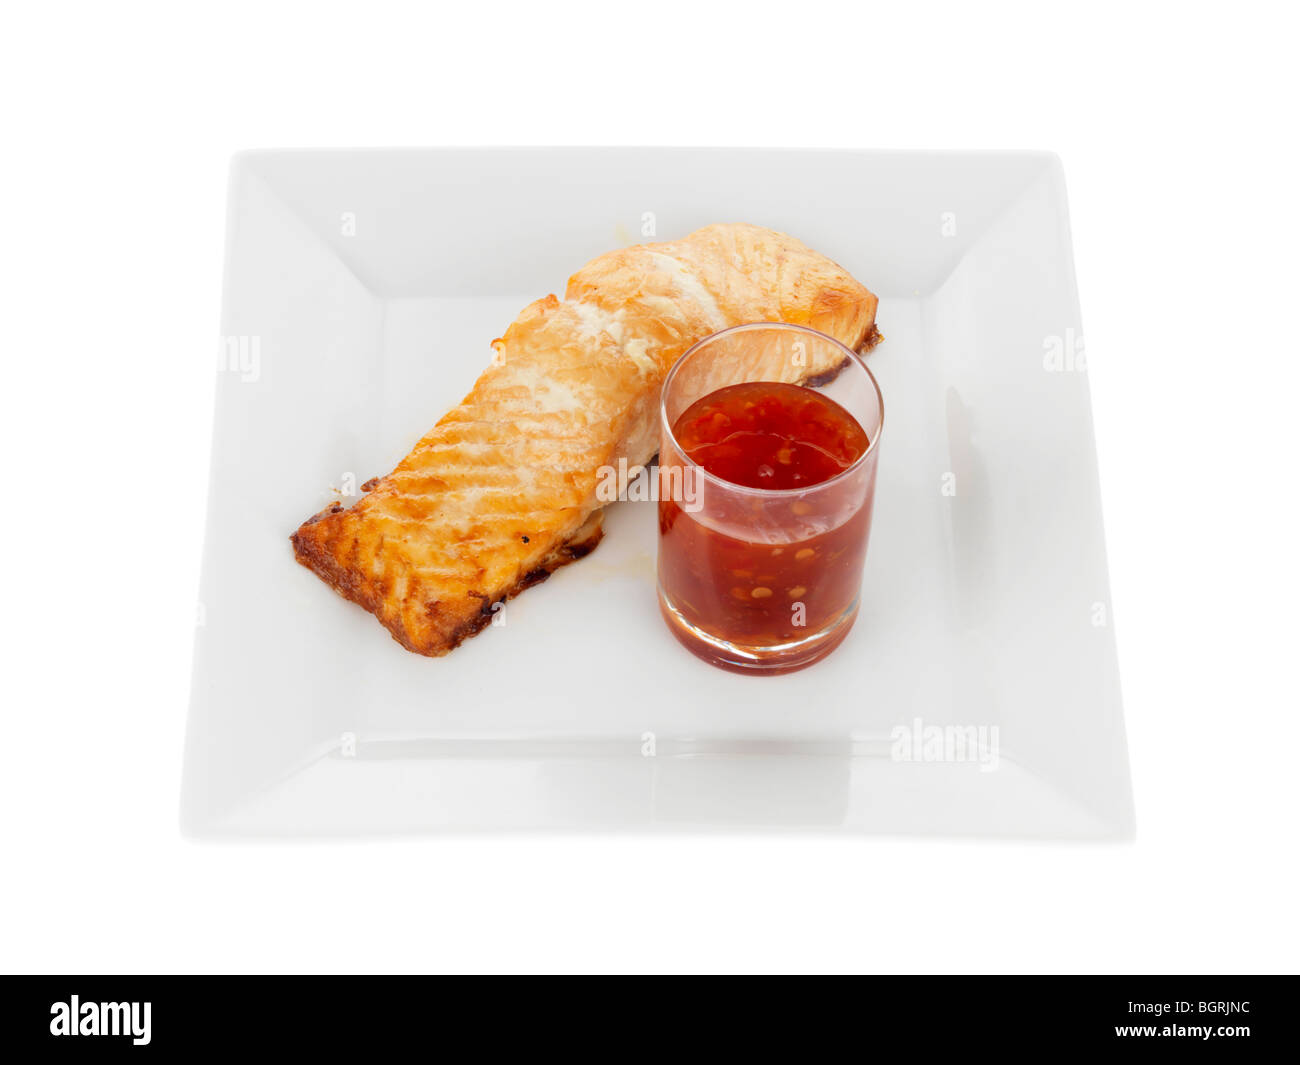 Baked Salmon with Sweet Chilli Sauce Stock Photo